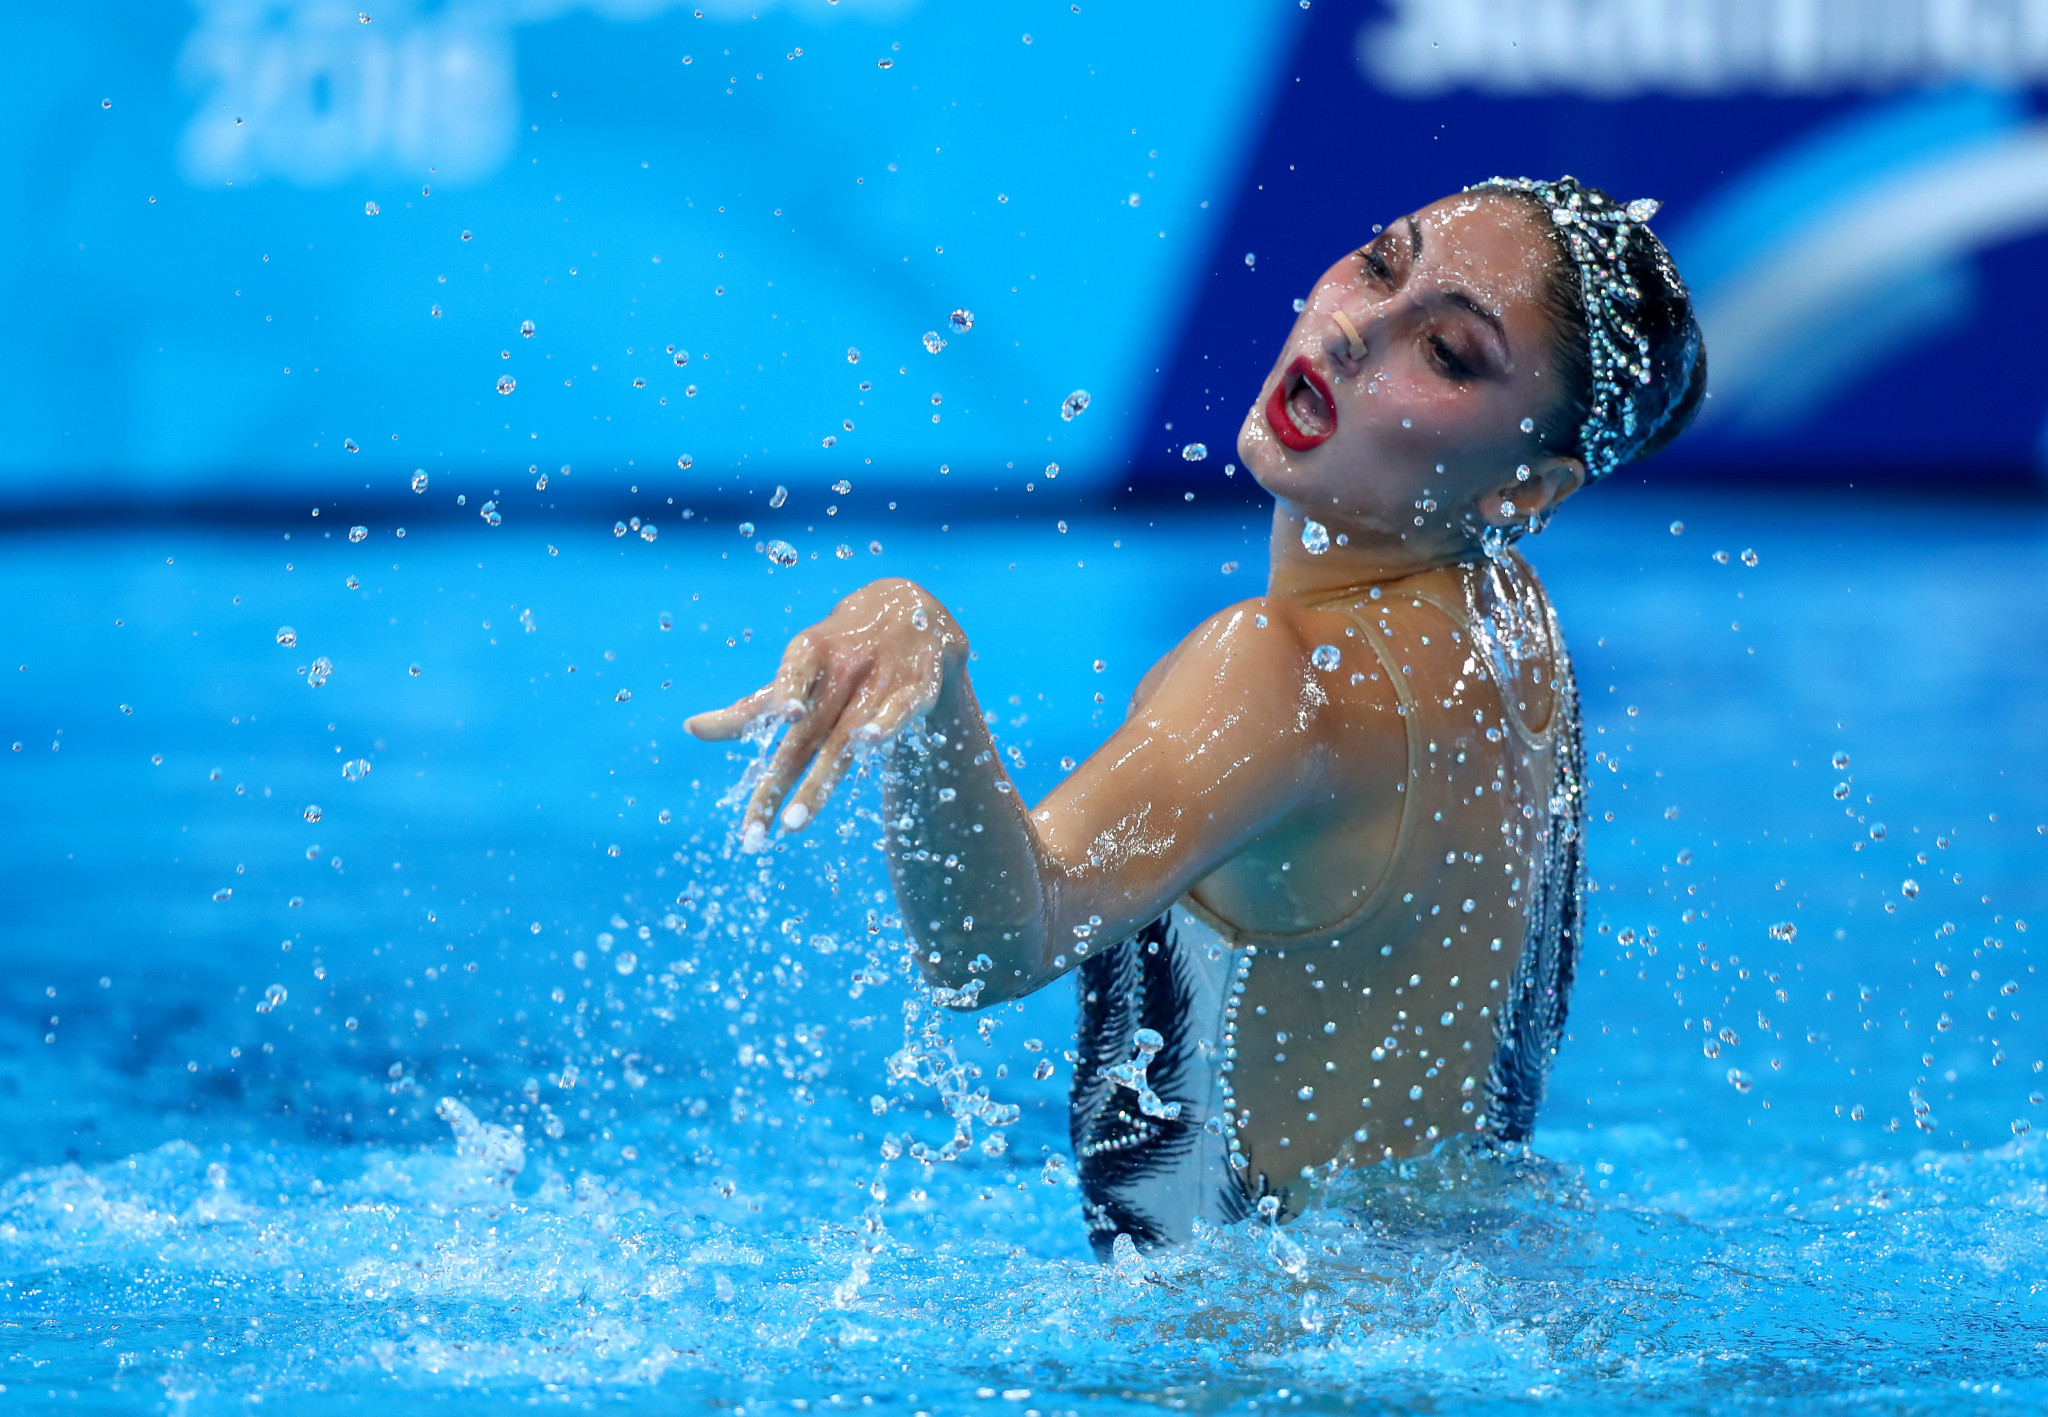 Alexandroupolis to host second event of FINA Artistic Swimming World Series